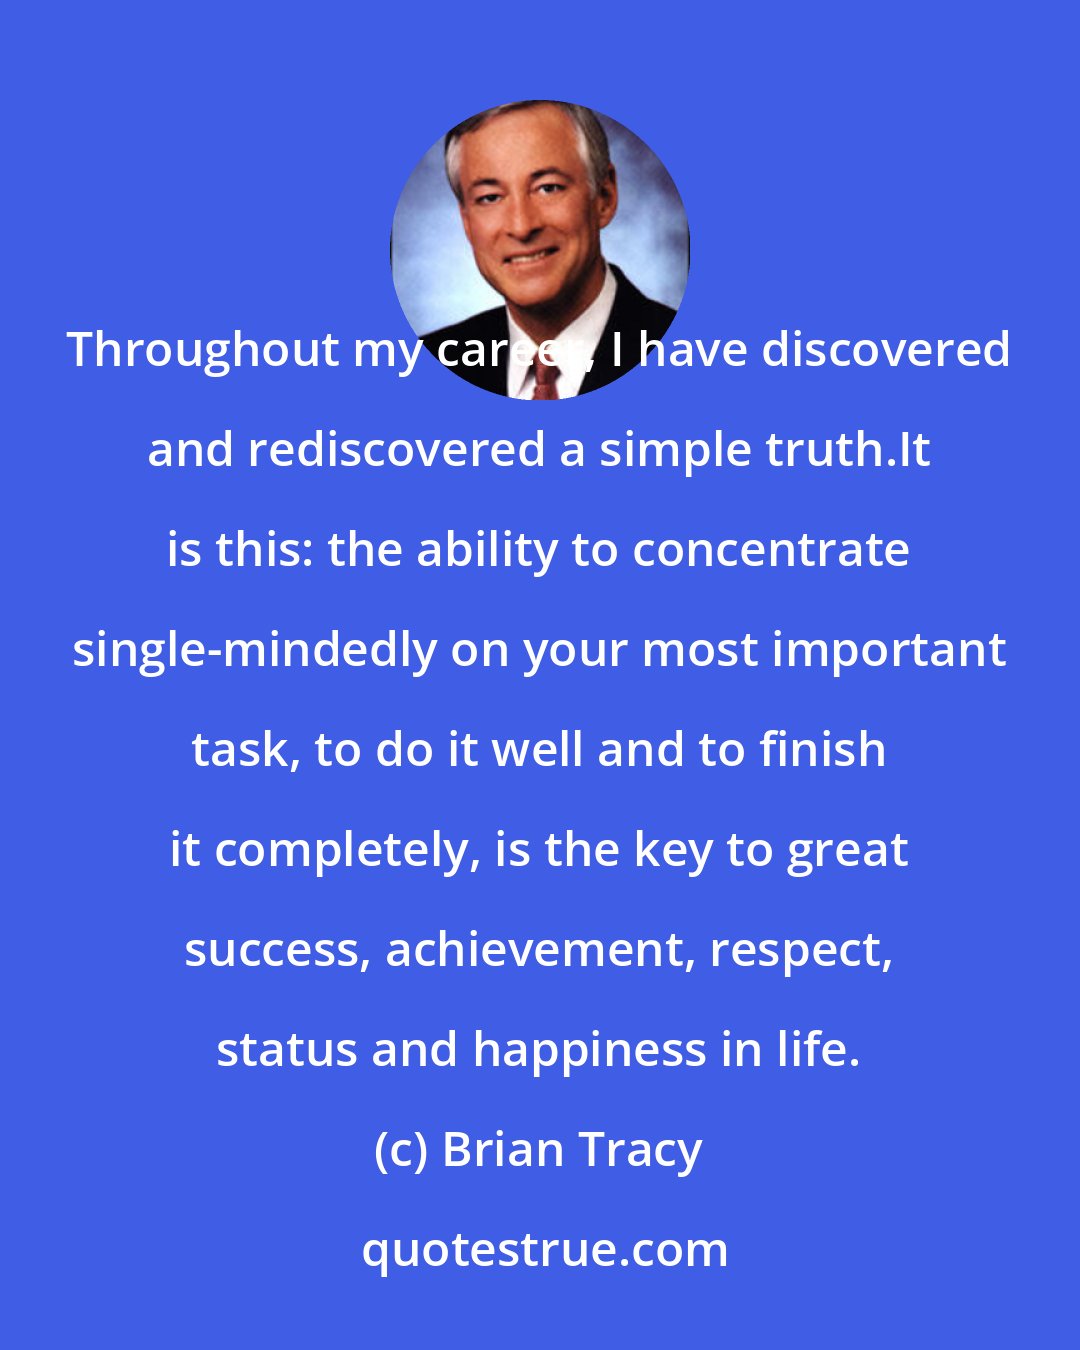 Brian Tracy: Throughout my career, I have discovered and rediscovered a simple truth.It is this: the ability to concentrate single-mindedly on your most important task, to do it well and to finish it completely, is the key to great success, achievement, respect, status and happiness in life.